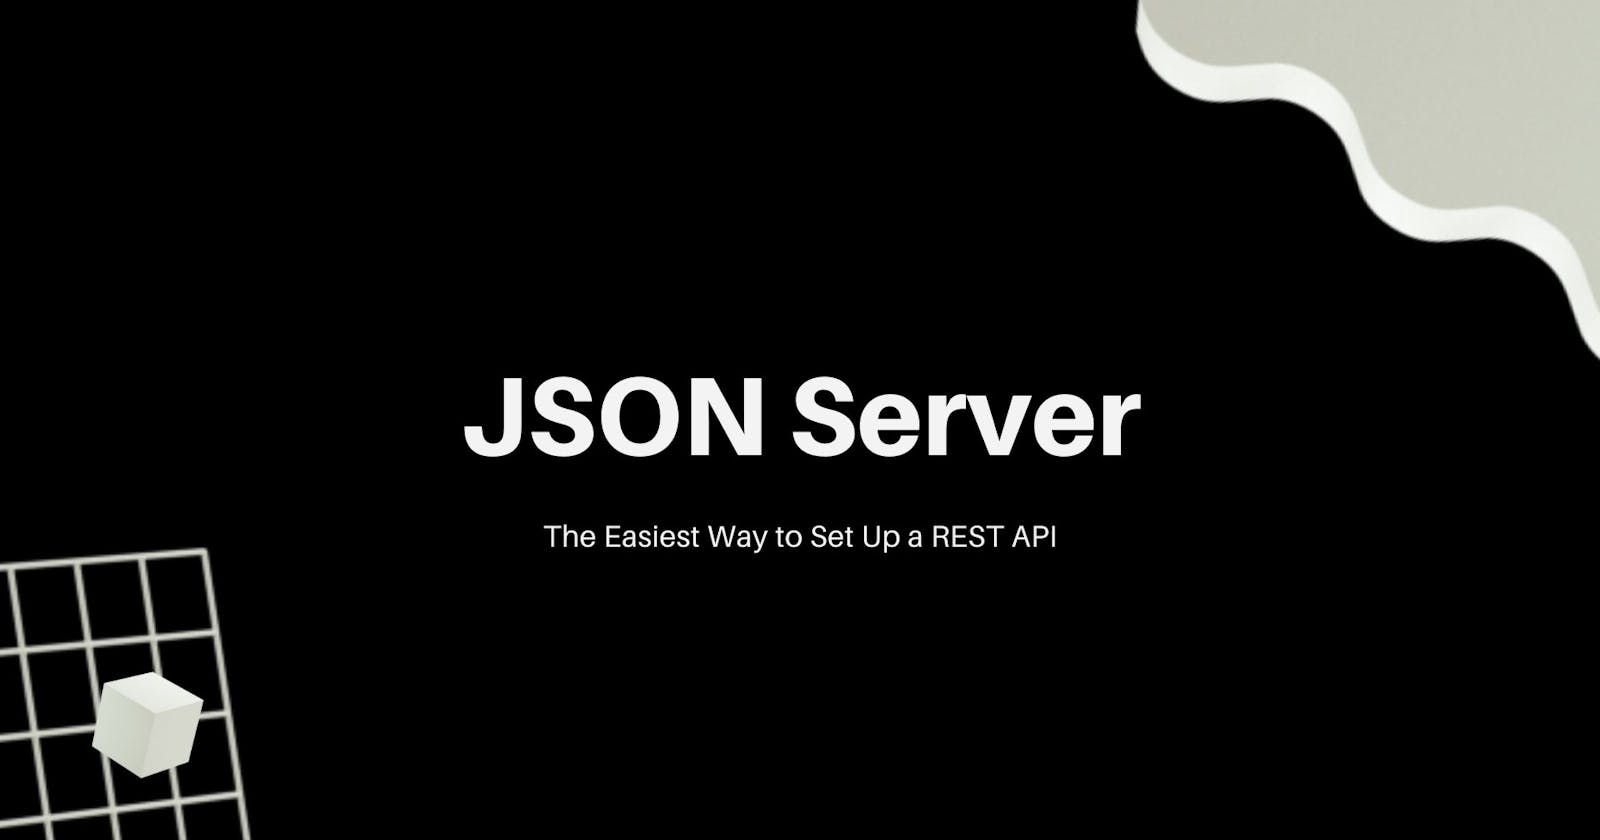 JSON Server - The Easiest Way to Set Up a REST API